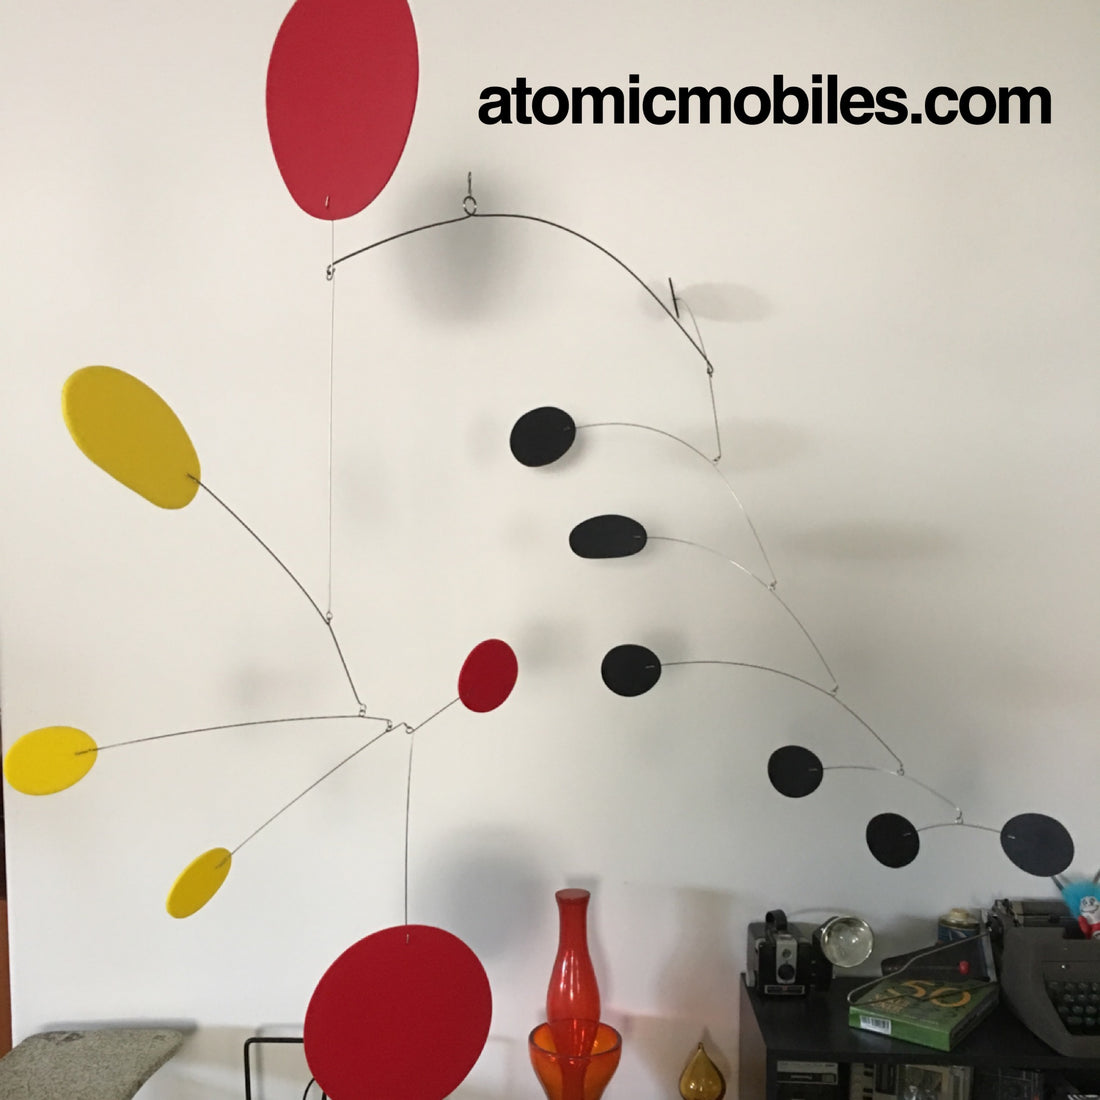 XXL Papillon Hanging Modern Art Mobile by AtomicMobiles.com